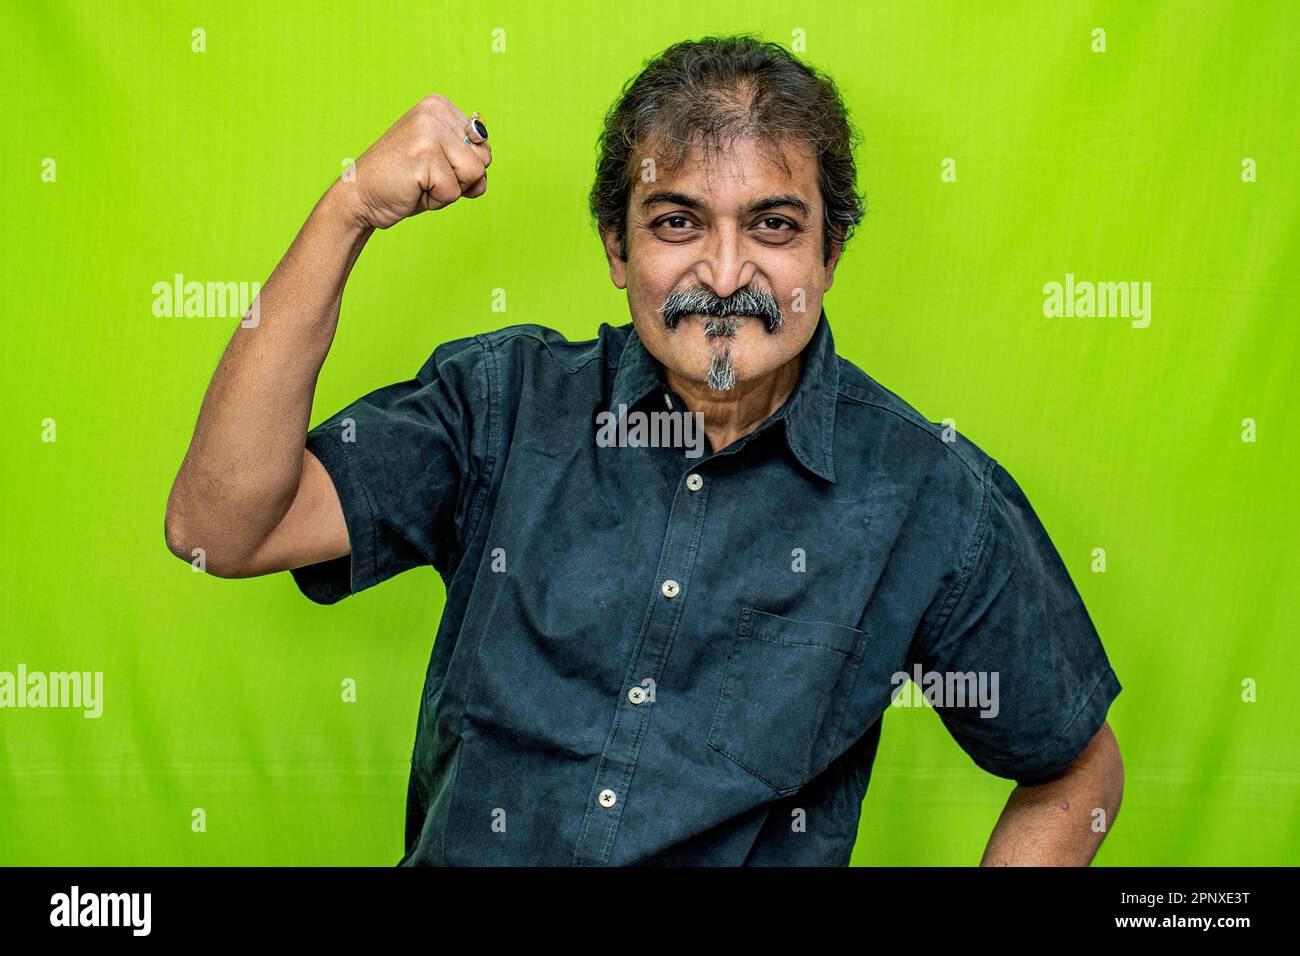 A well-dressed corporate man in a black shirt stands against a green screen, appearing to celebrate a win as he raises his right hand in a closed fist Stock Photo